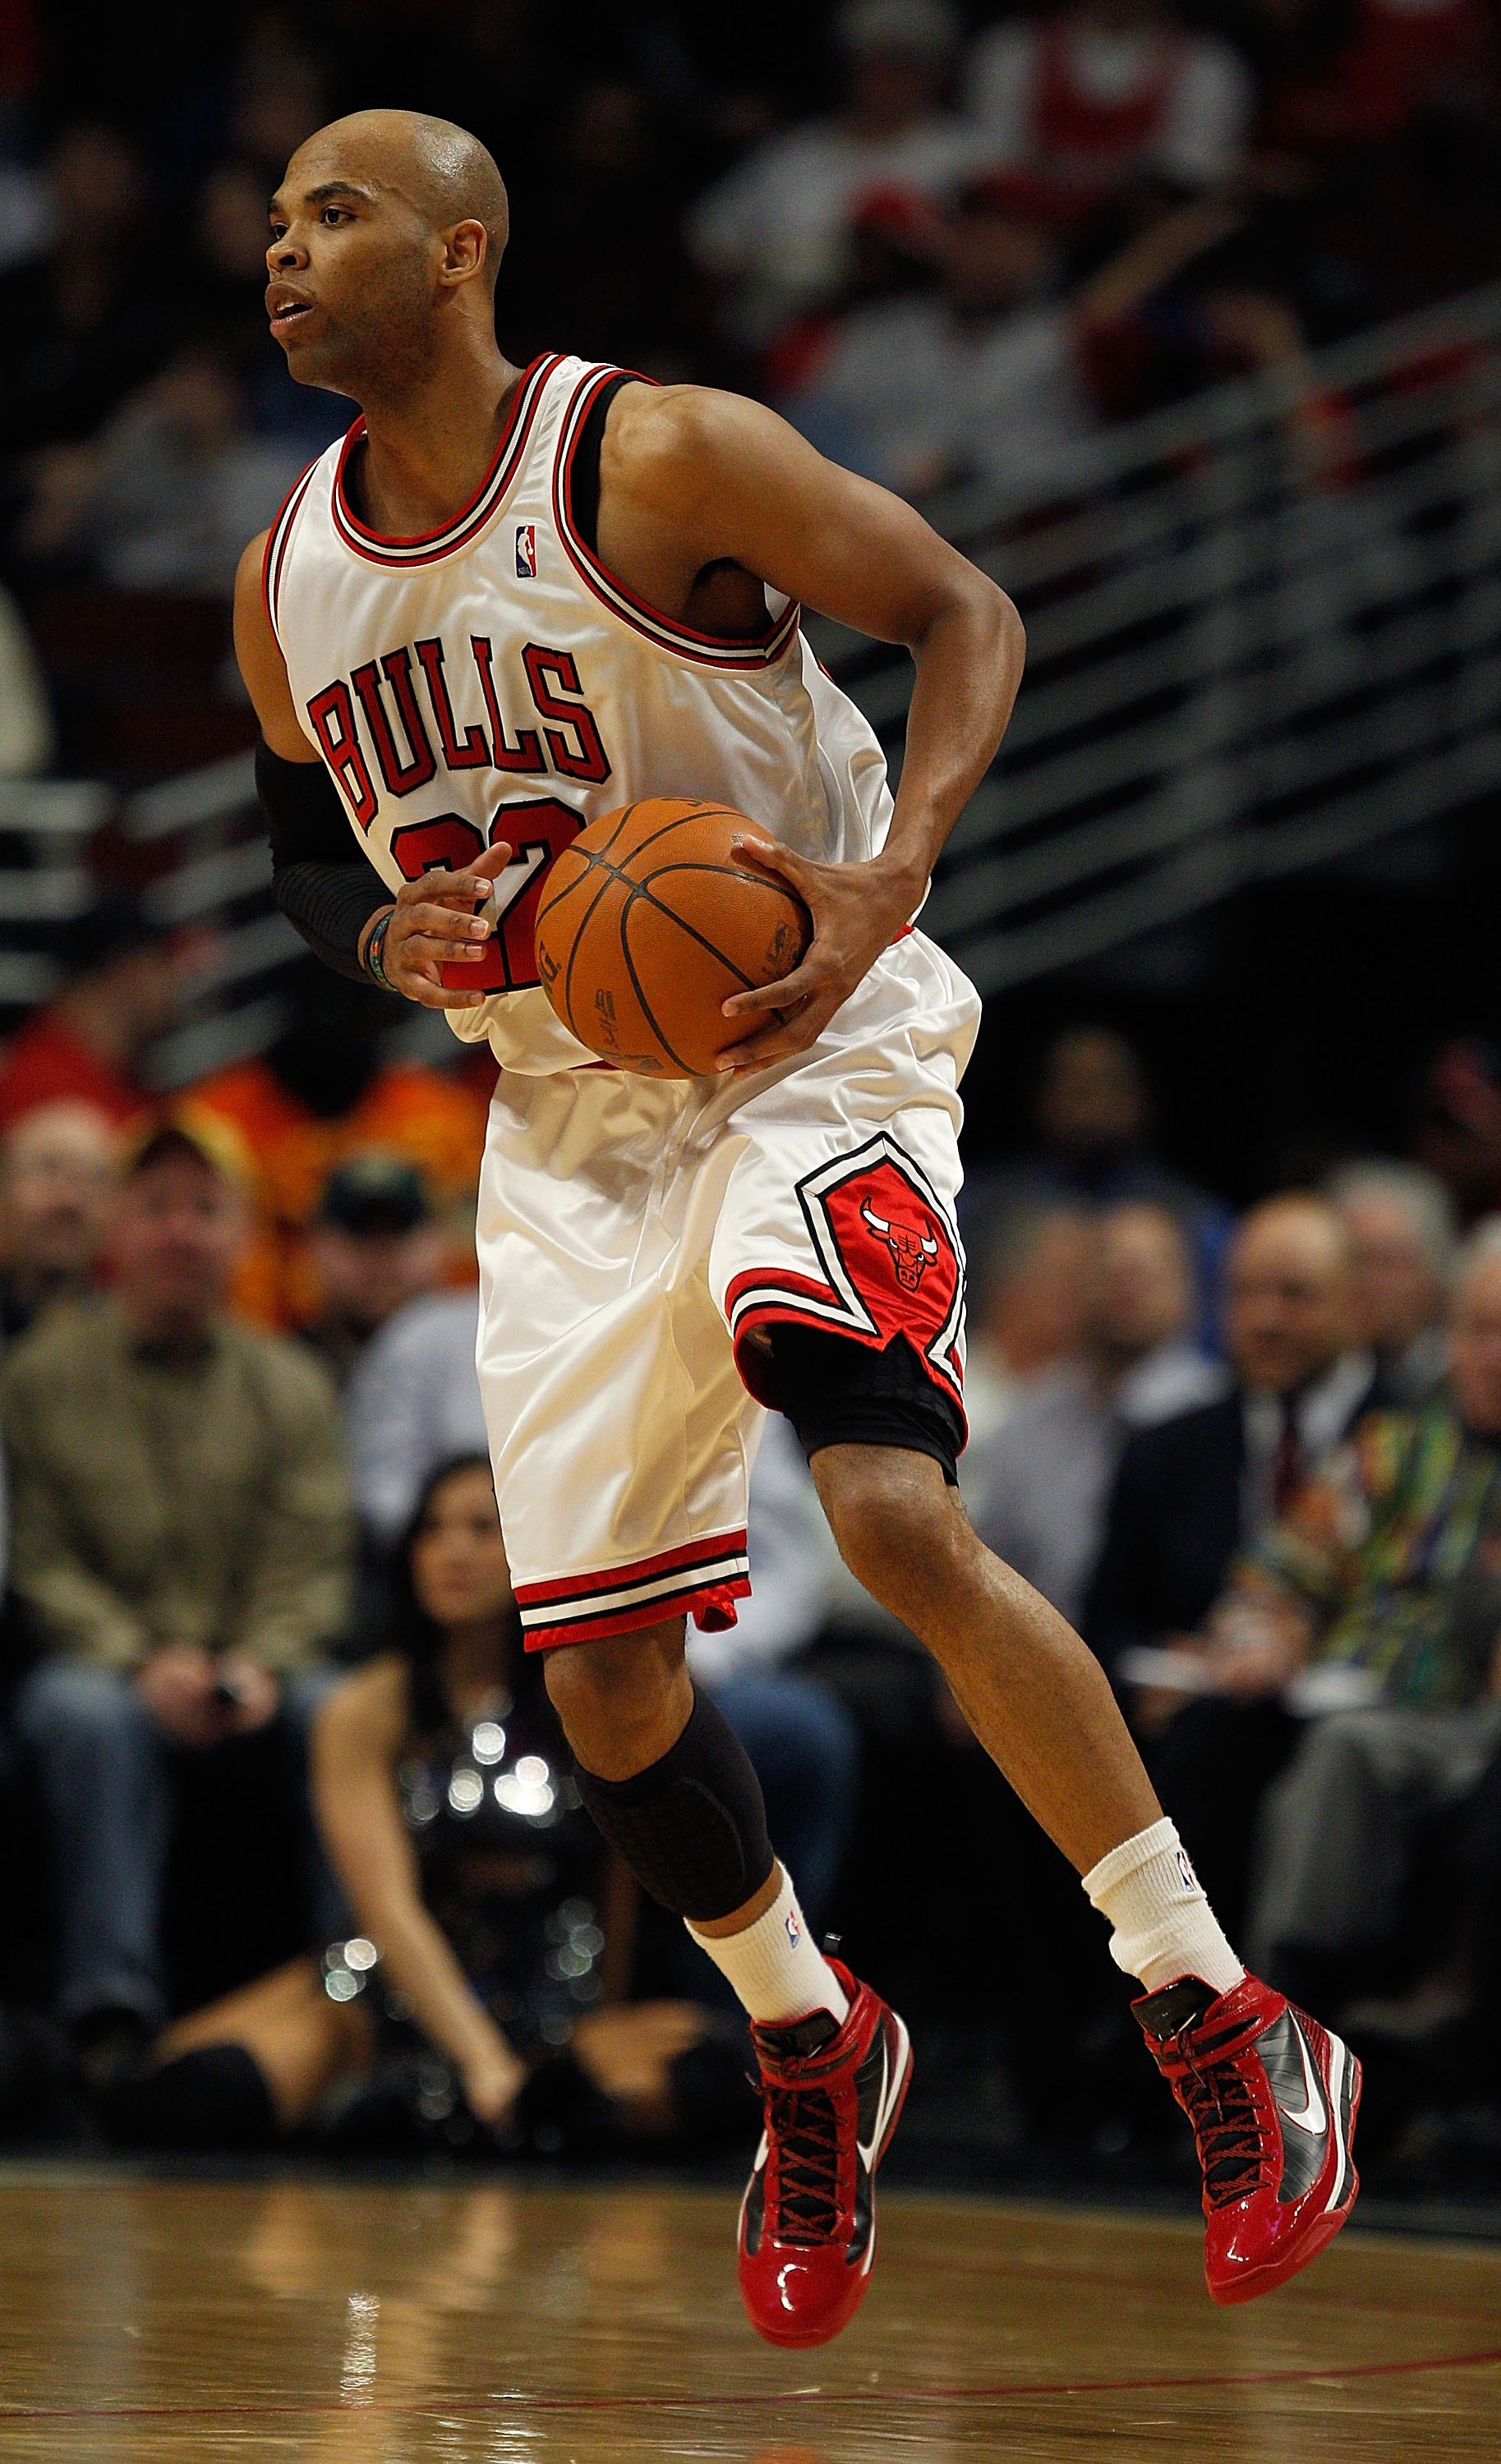 CHICAGO - MARCH 30: Taj Gibson #22 of the Chicago Bulls looks to pass against the Phoenix Suns at the United Center on March 30, 2010 in Chicago, Illinois. The Suns defeated the Bulls 111-105. NOTE TO USER: User expressly acknowledges and agrees that, by